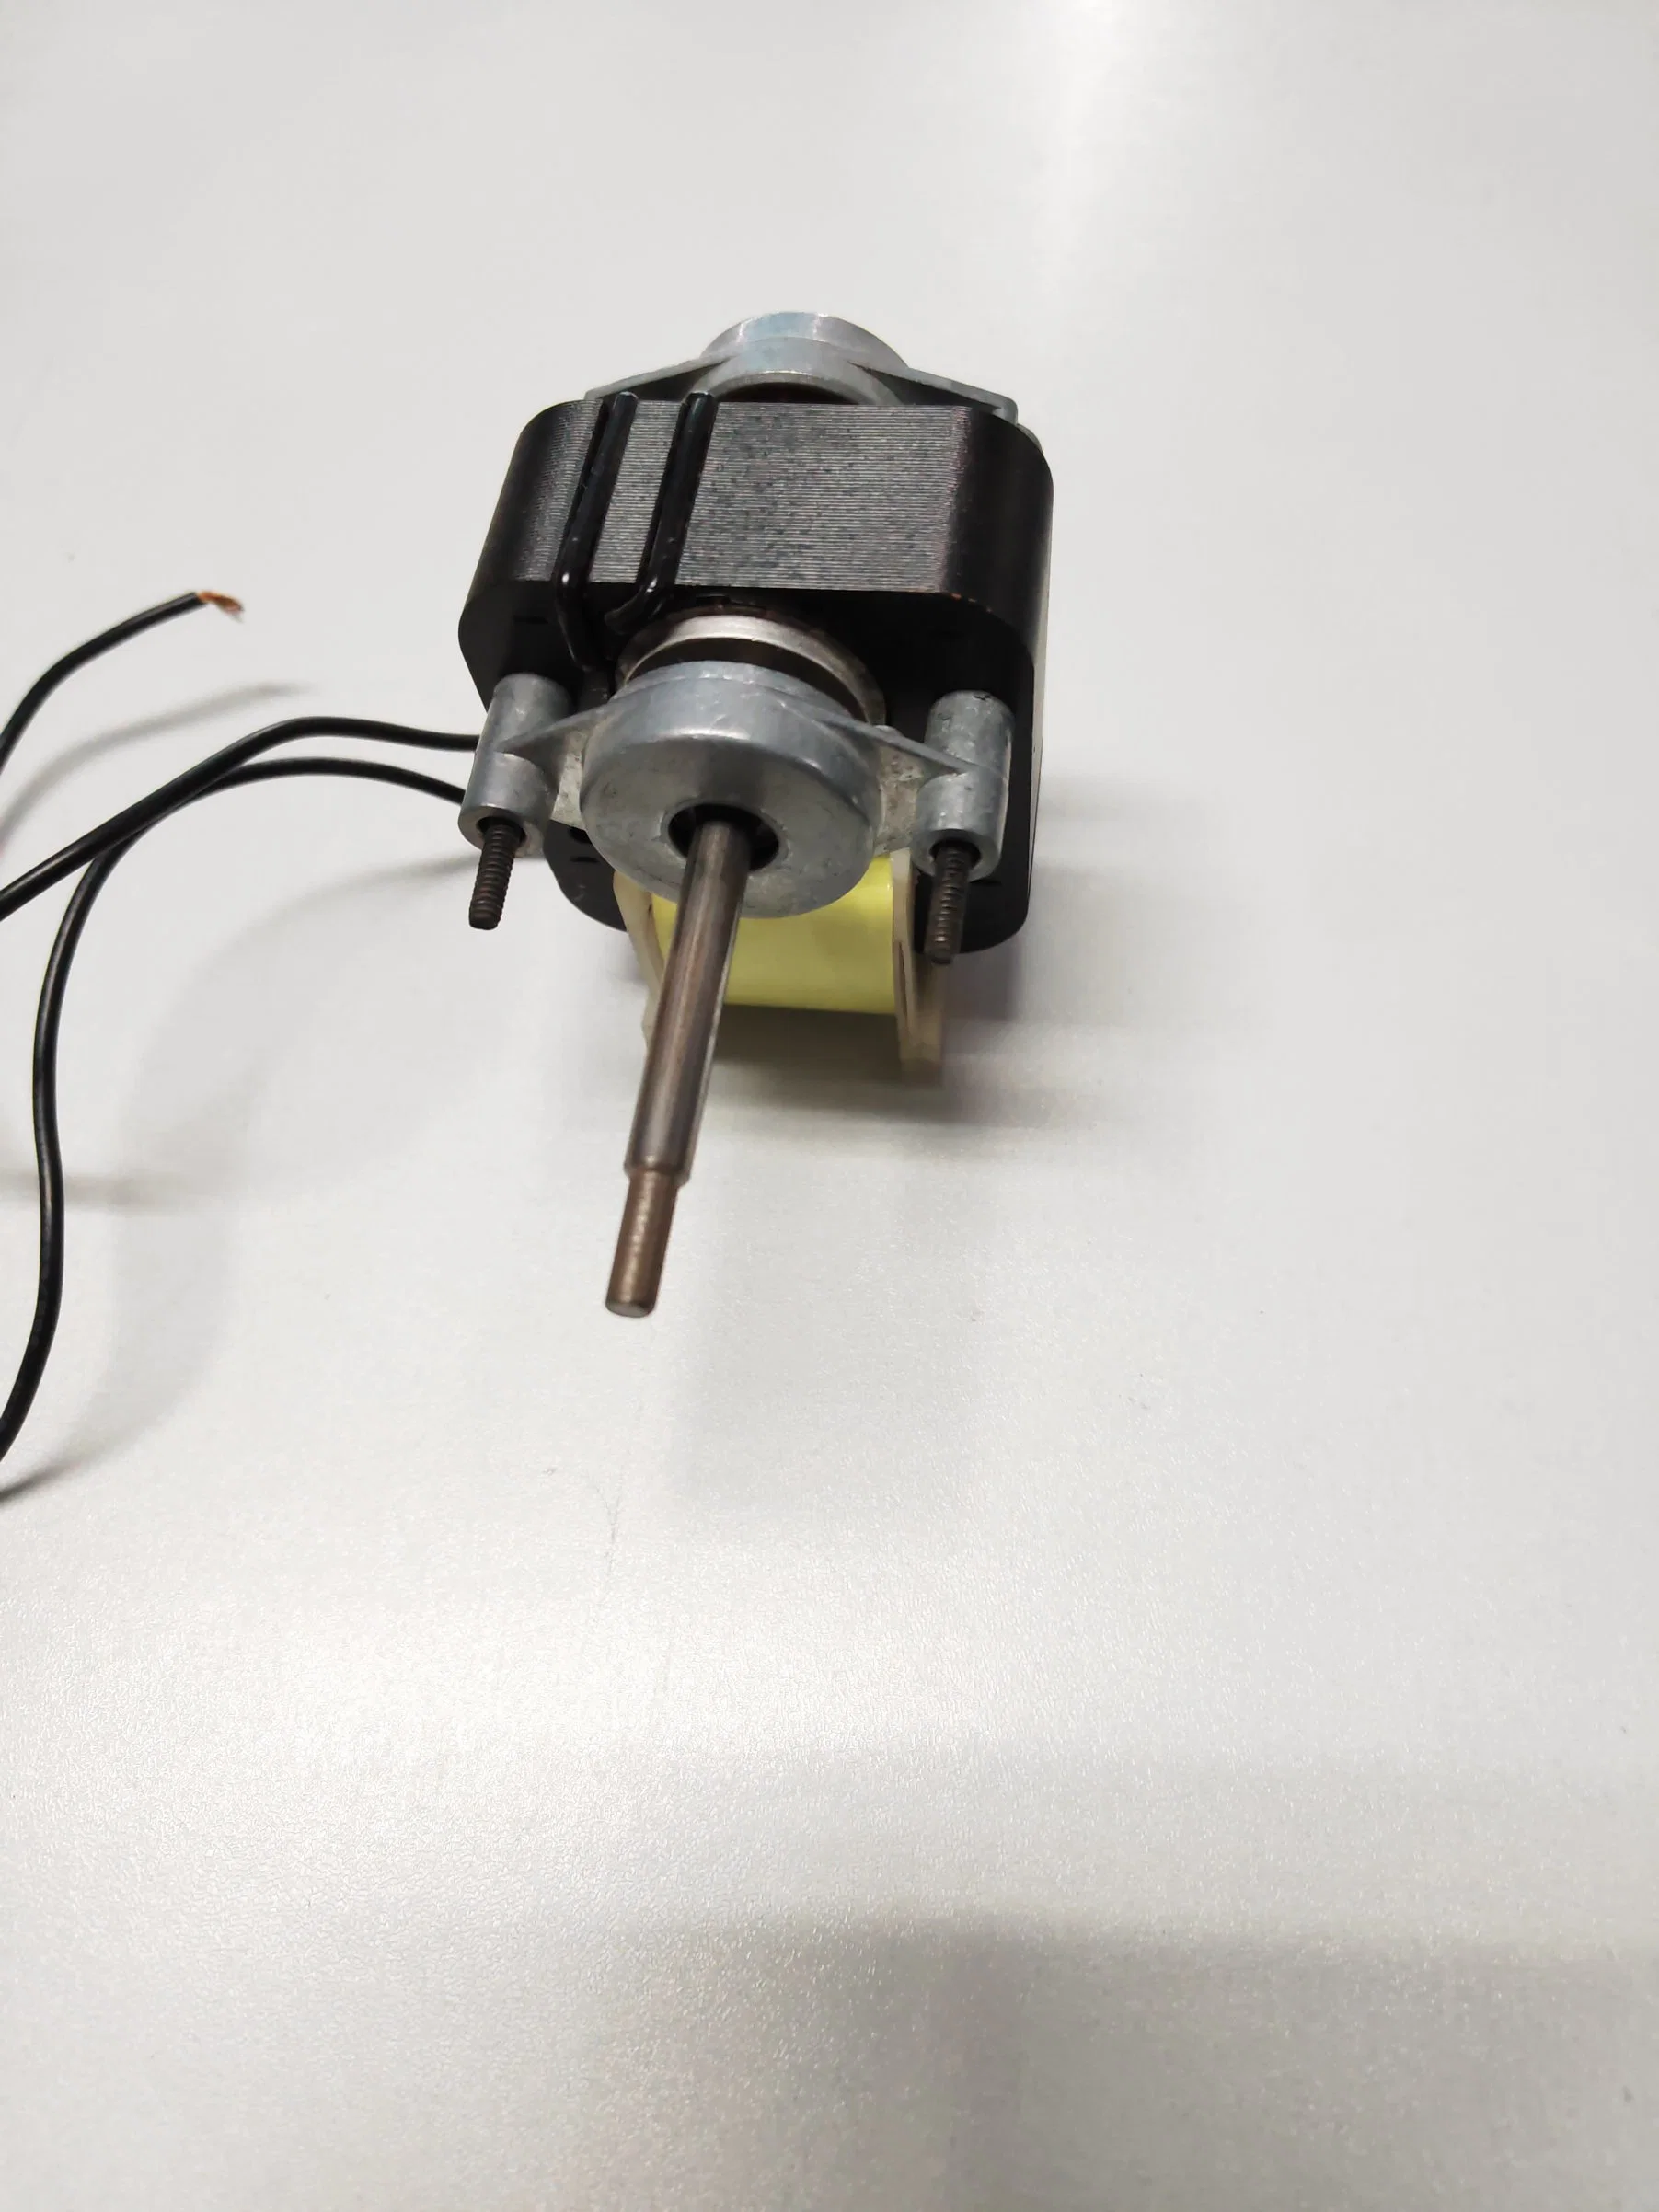 Mini Cooling Evaporator Condenser Electric Fan Motor with Spare Parts